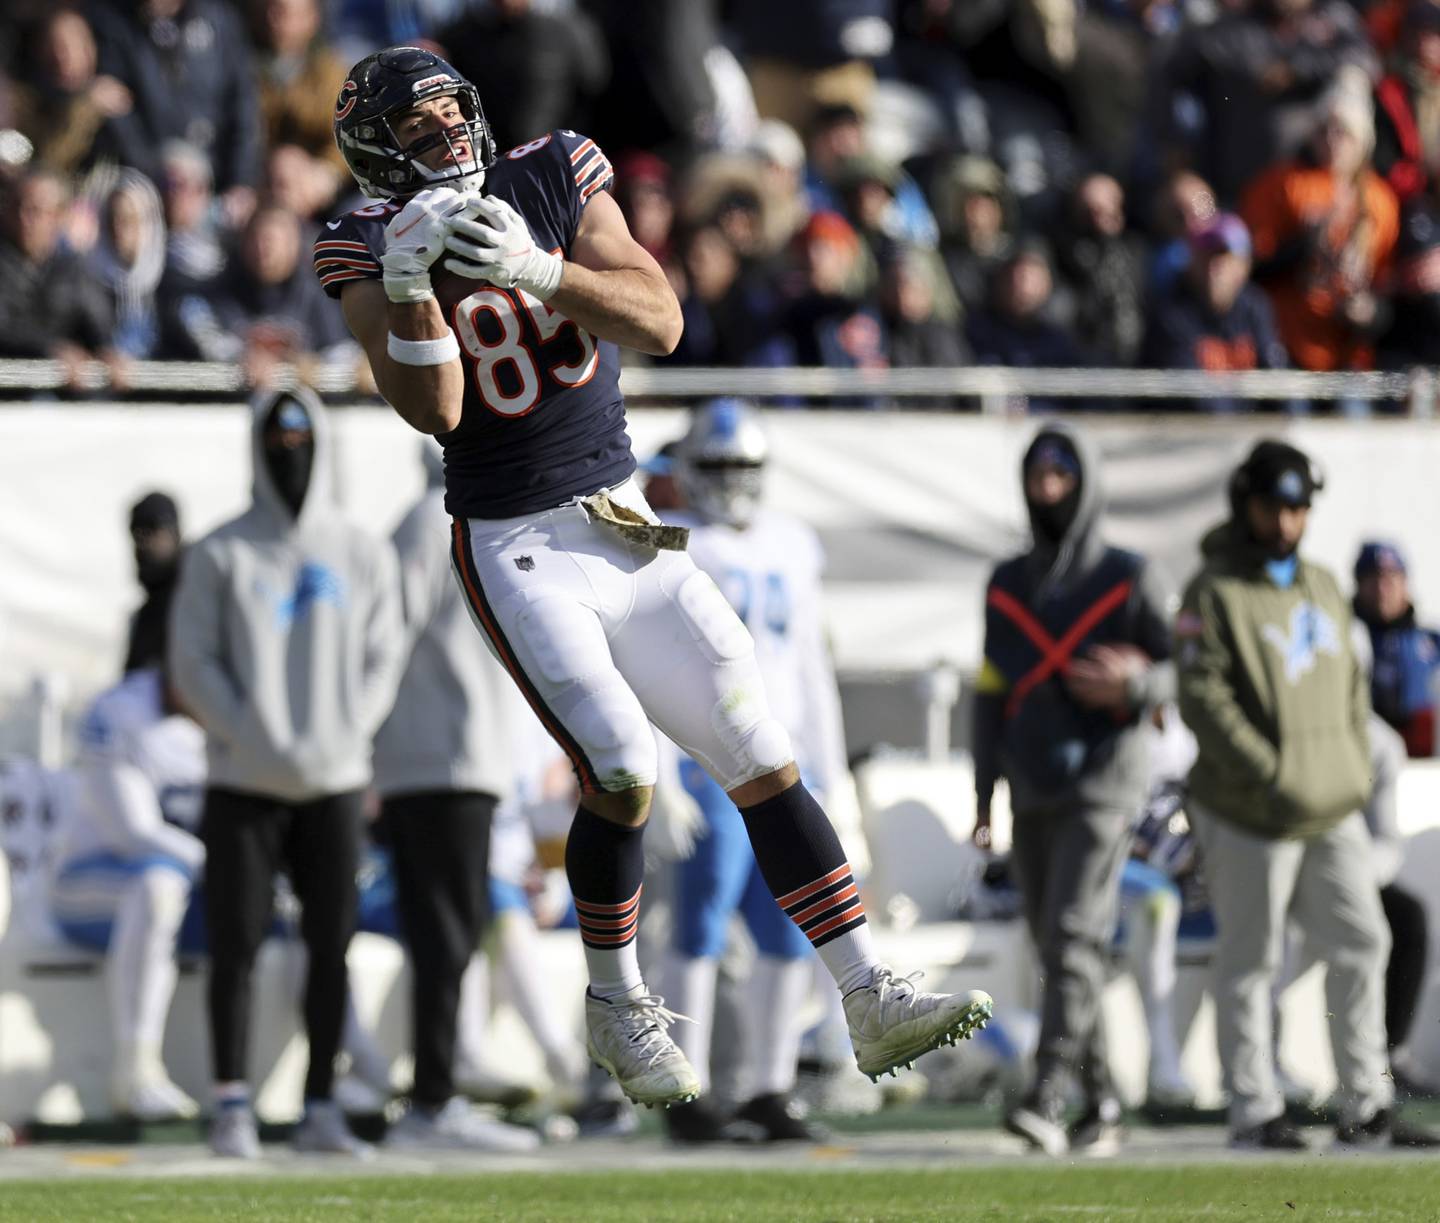 Bears tight end Cole Kmet catches a long pass for a touchdown in the third quarter against the Lions at Soldier Field on Nov. 13, 2022.